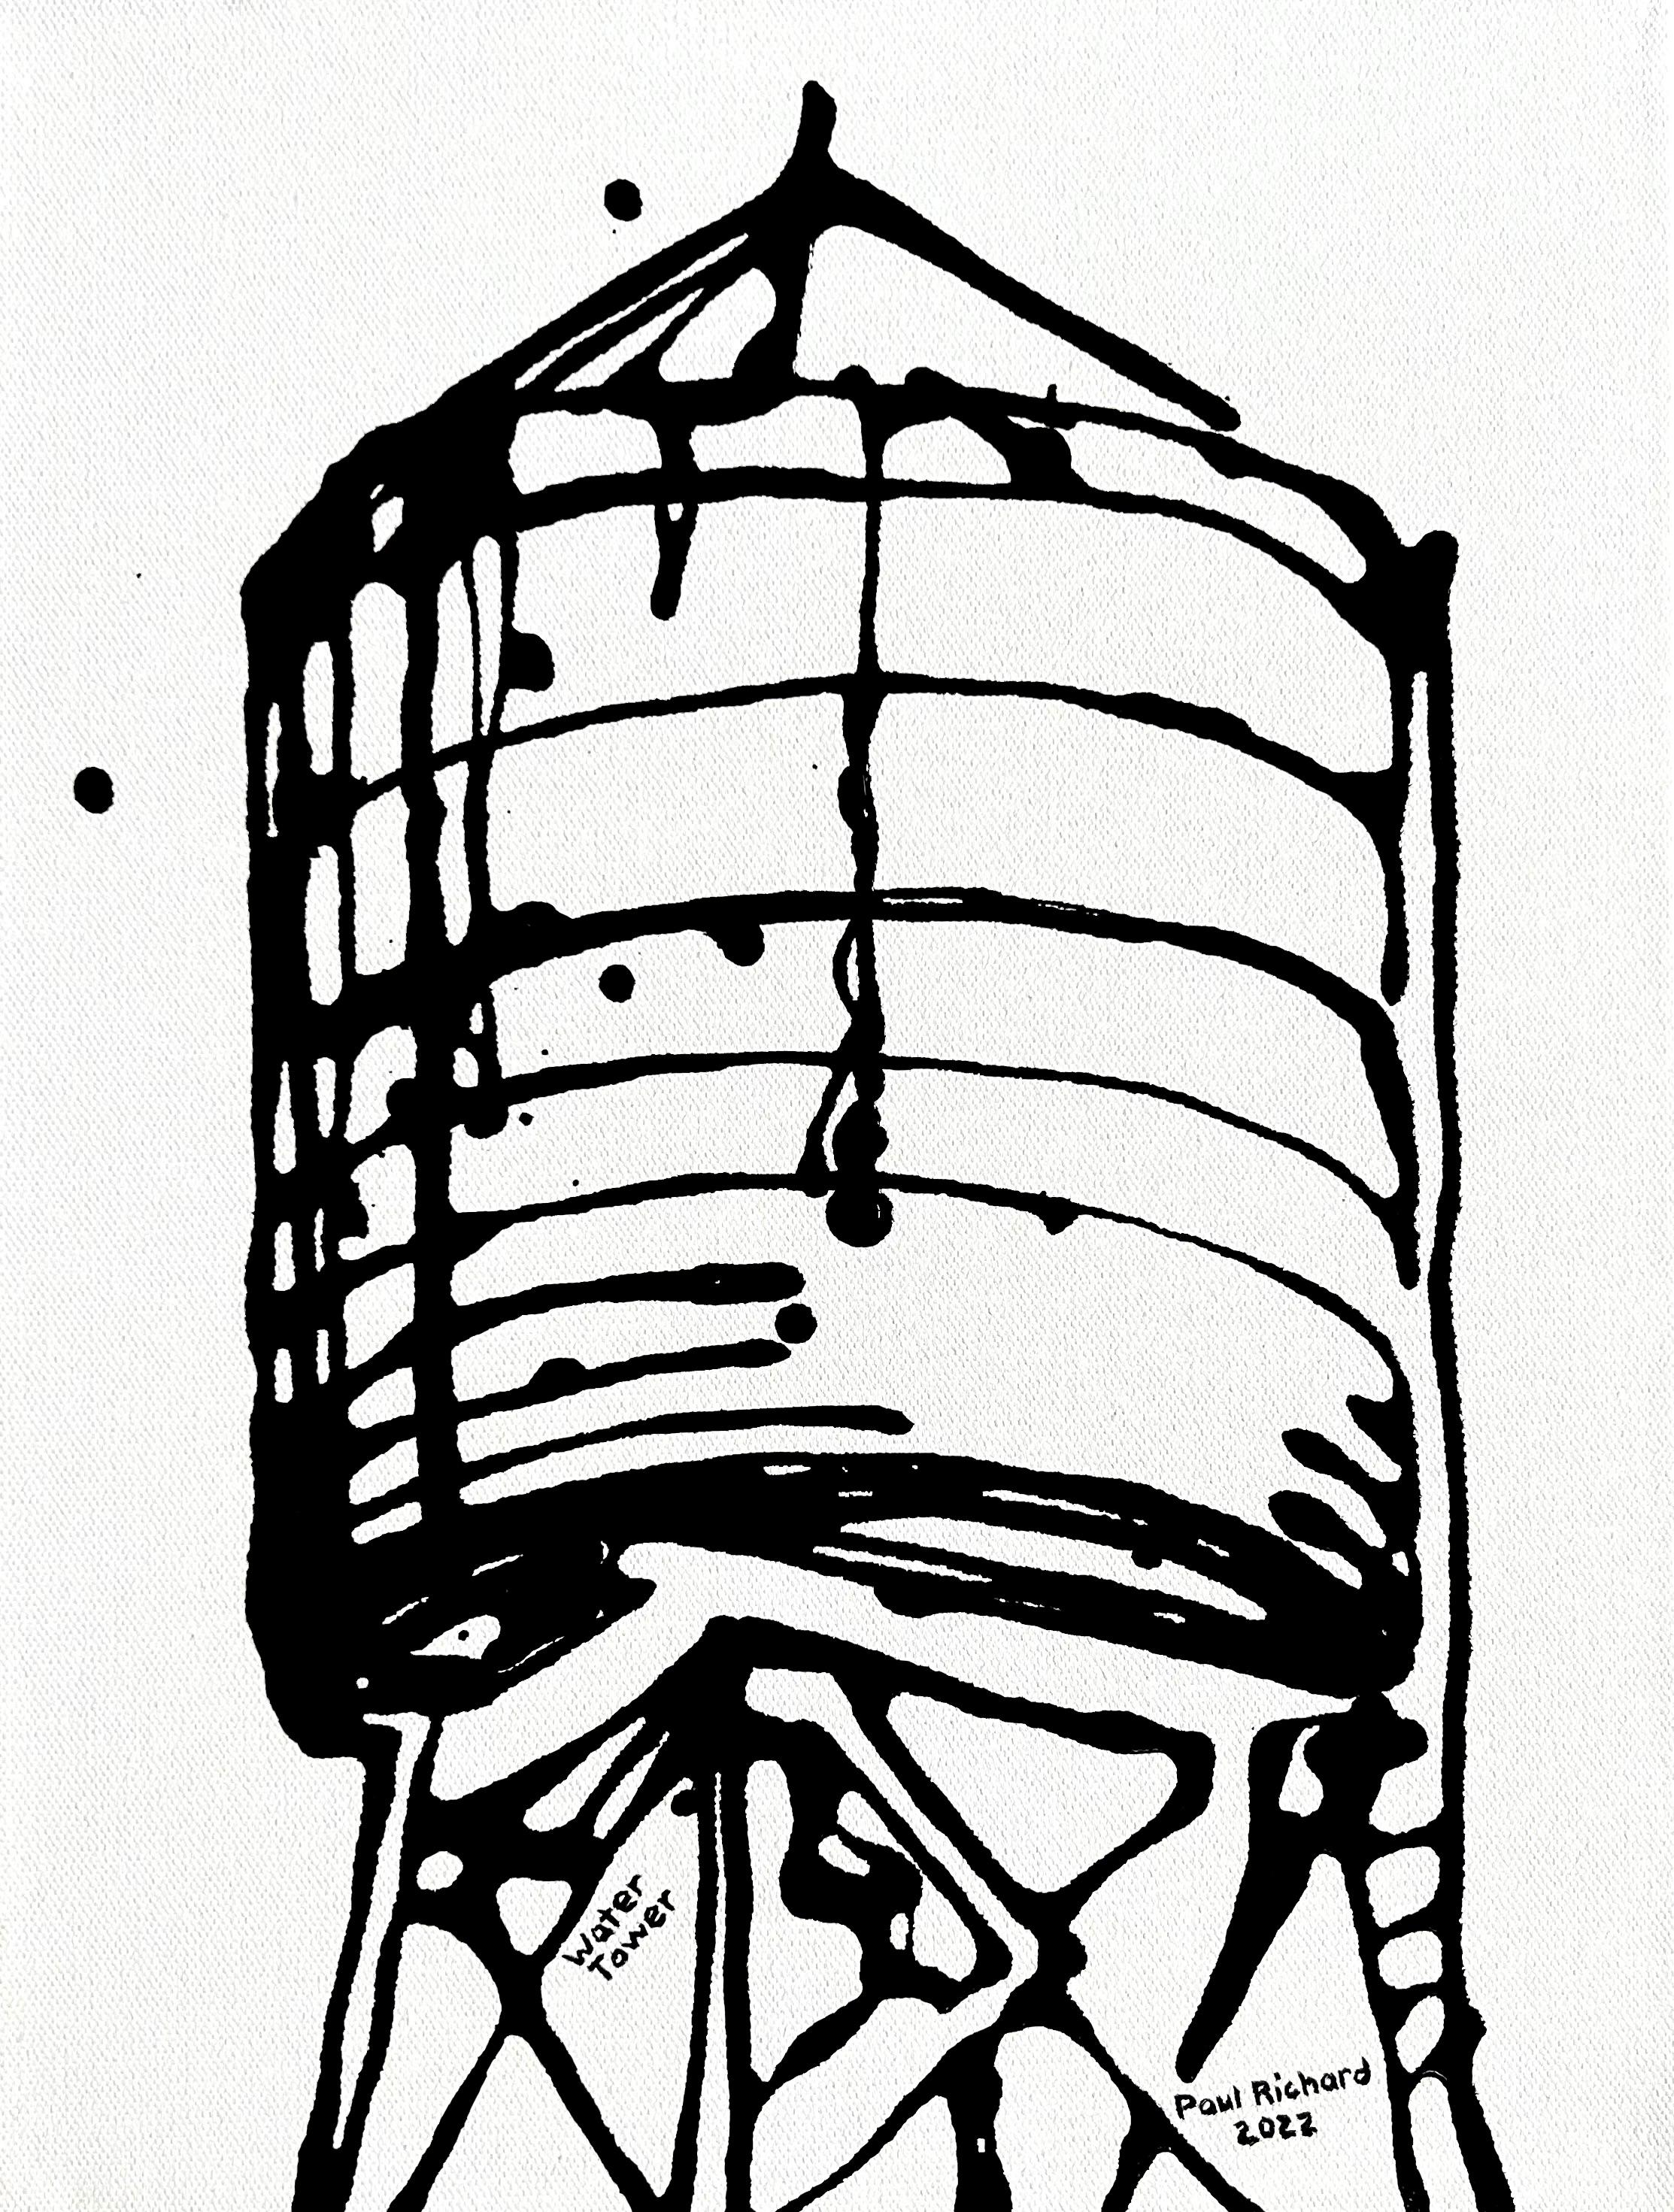 Water Tower - Painting by Paul Richard